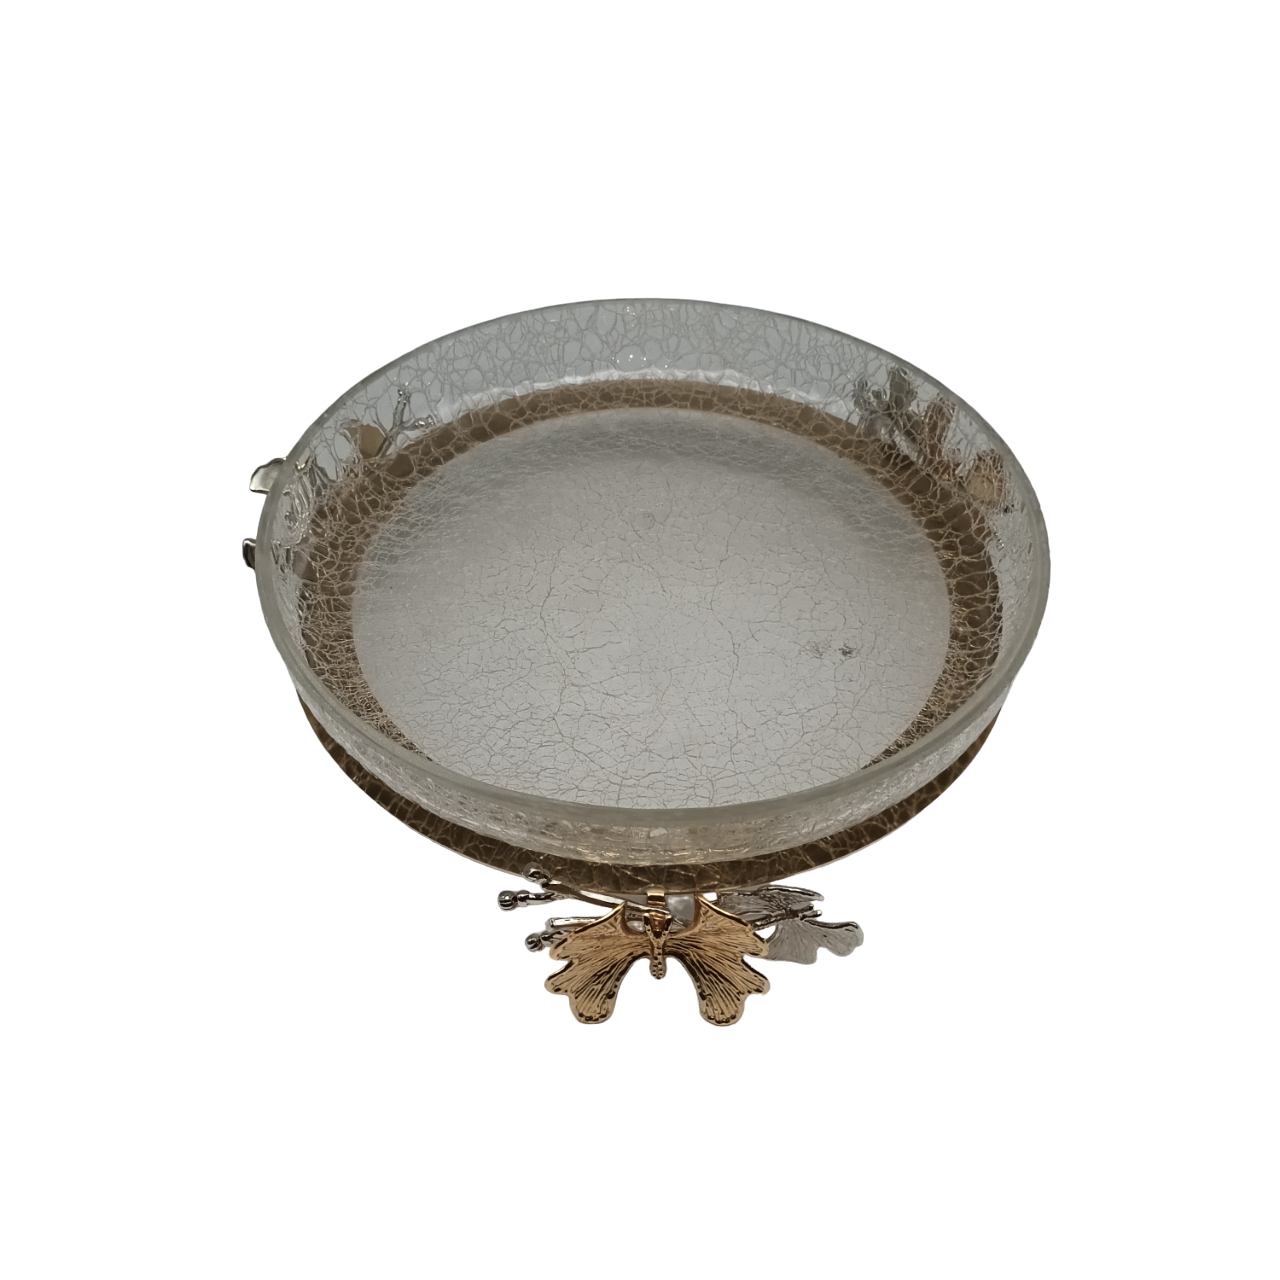 Ornate Floral Tray - Round